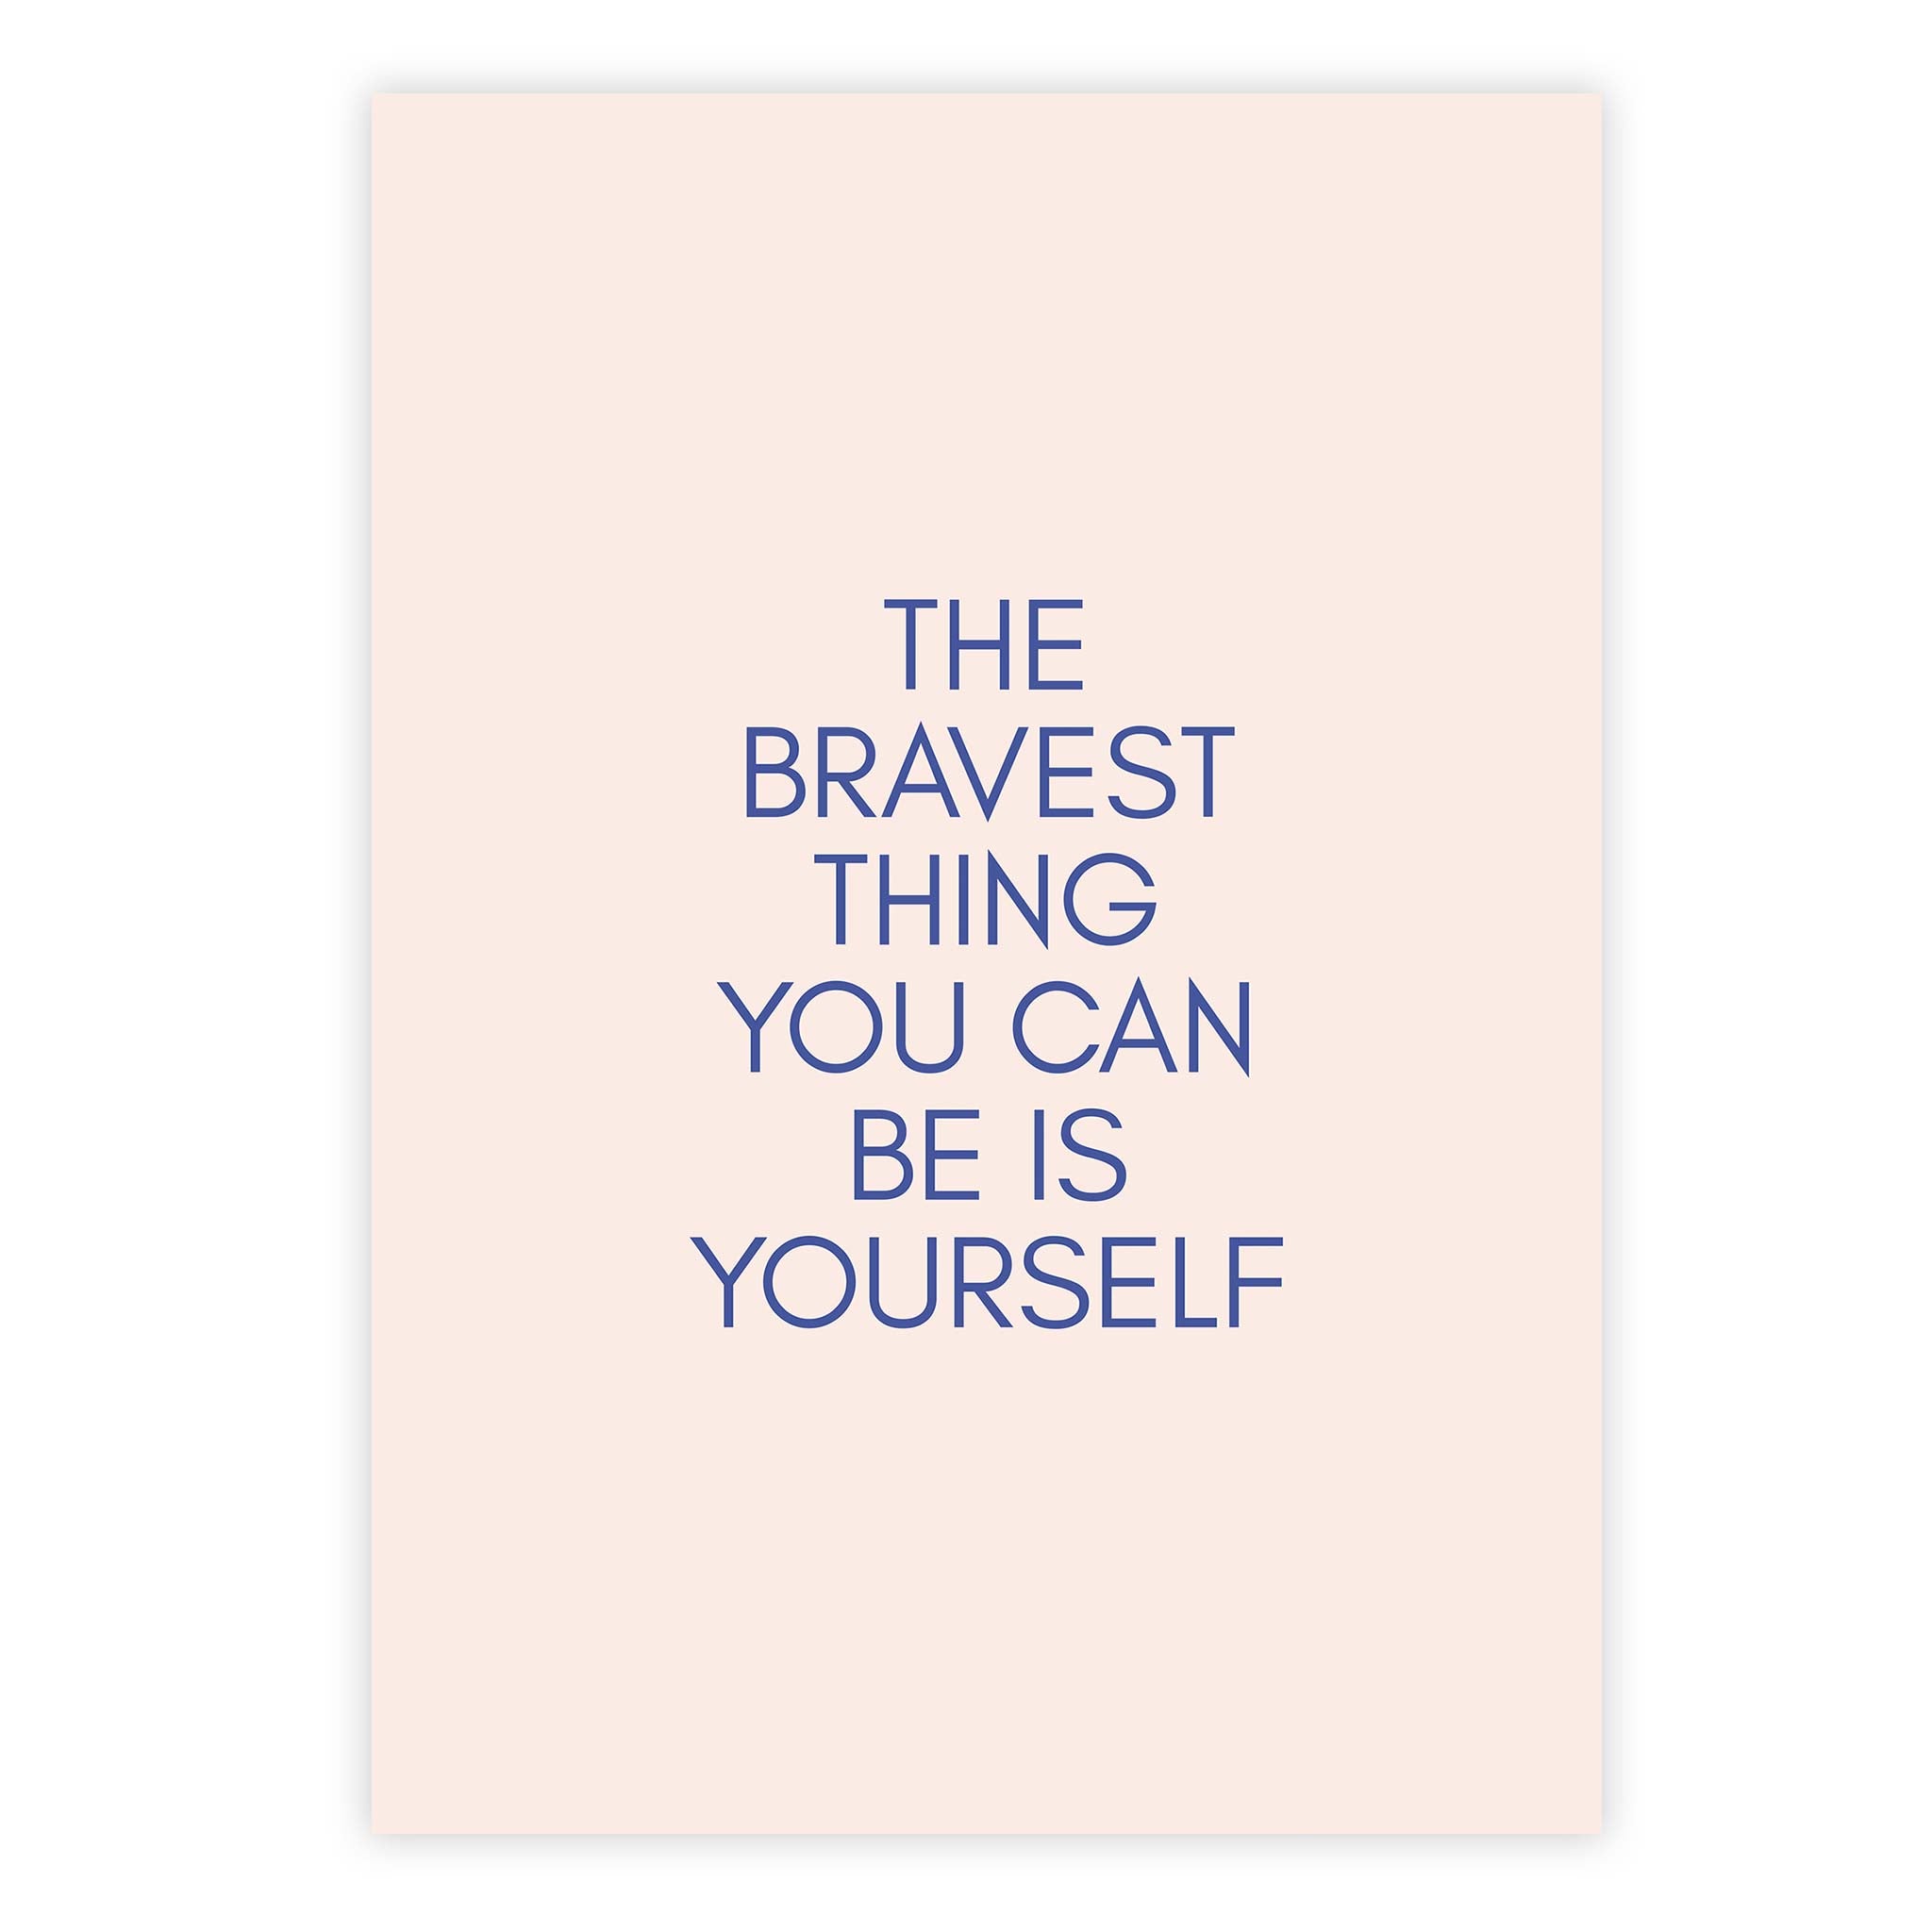 The bravest thing you can be is yourself